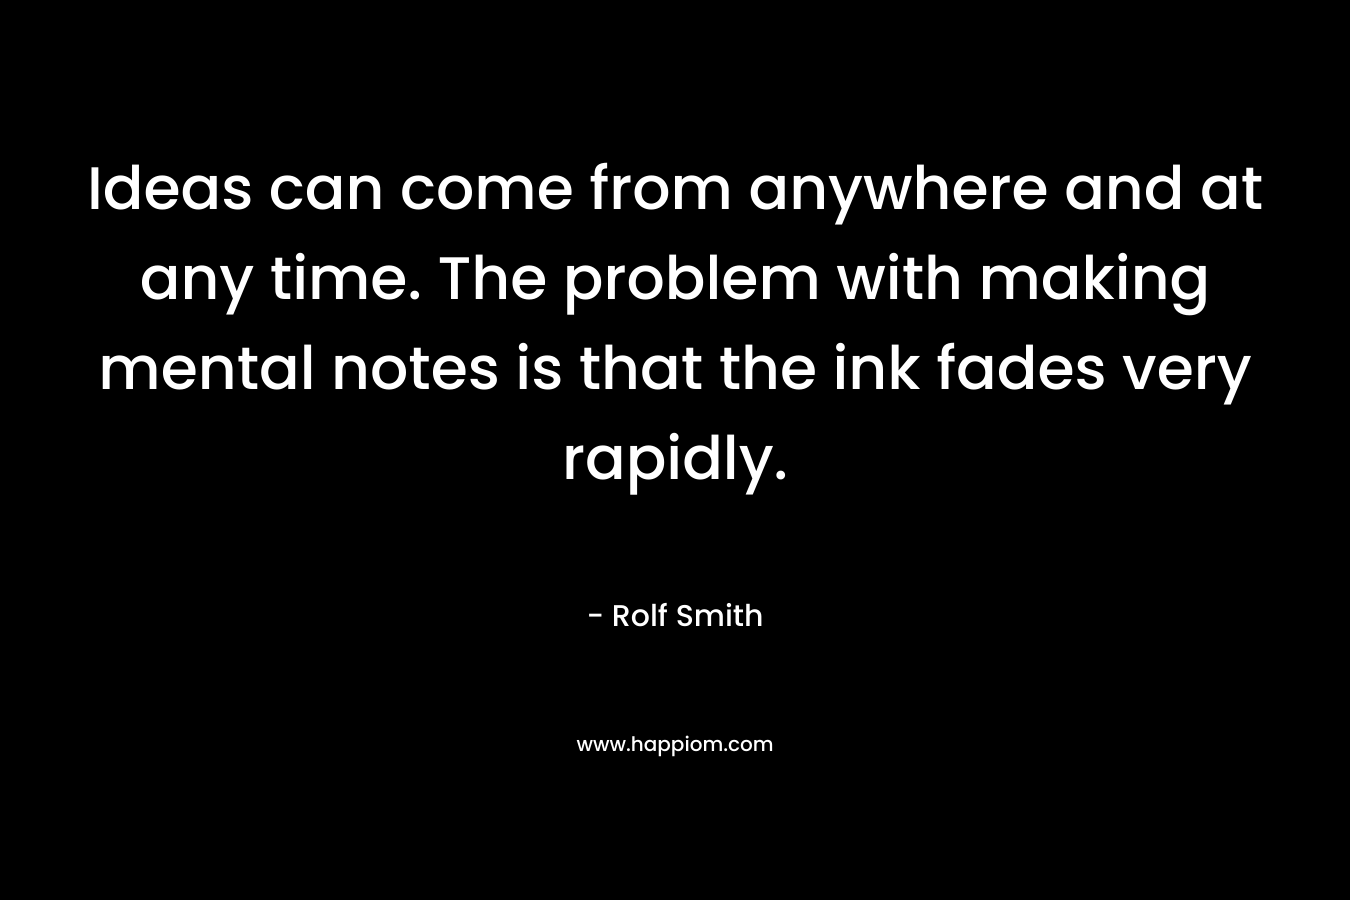 Ideas can come from anywhere and at any time. The problem with making mental notes is that the ink fades very rapidly. – Rolf Smith